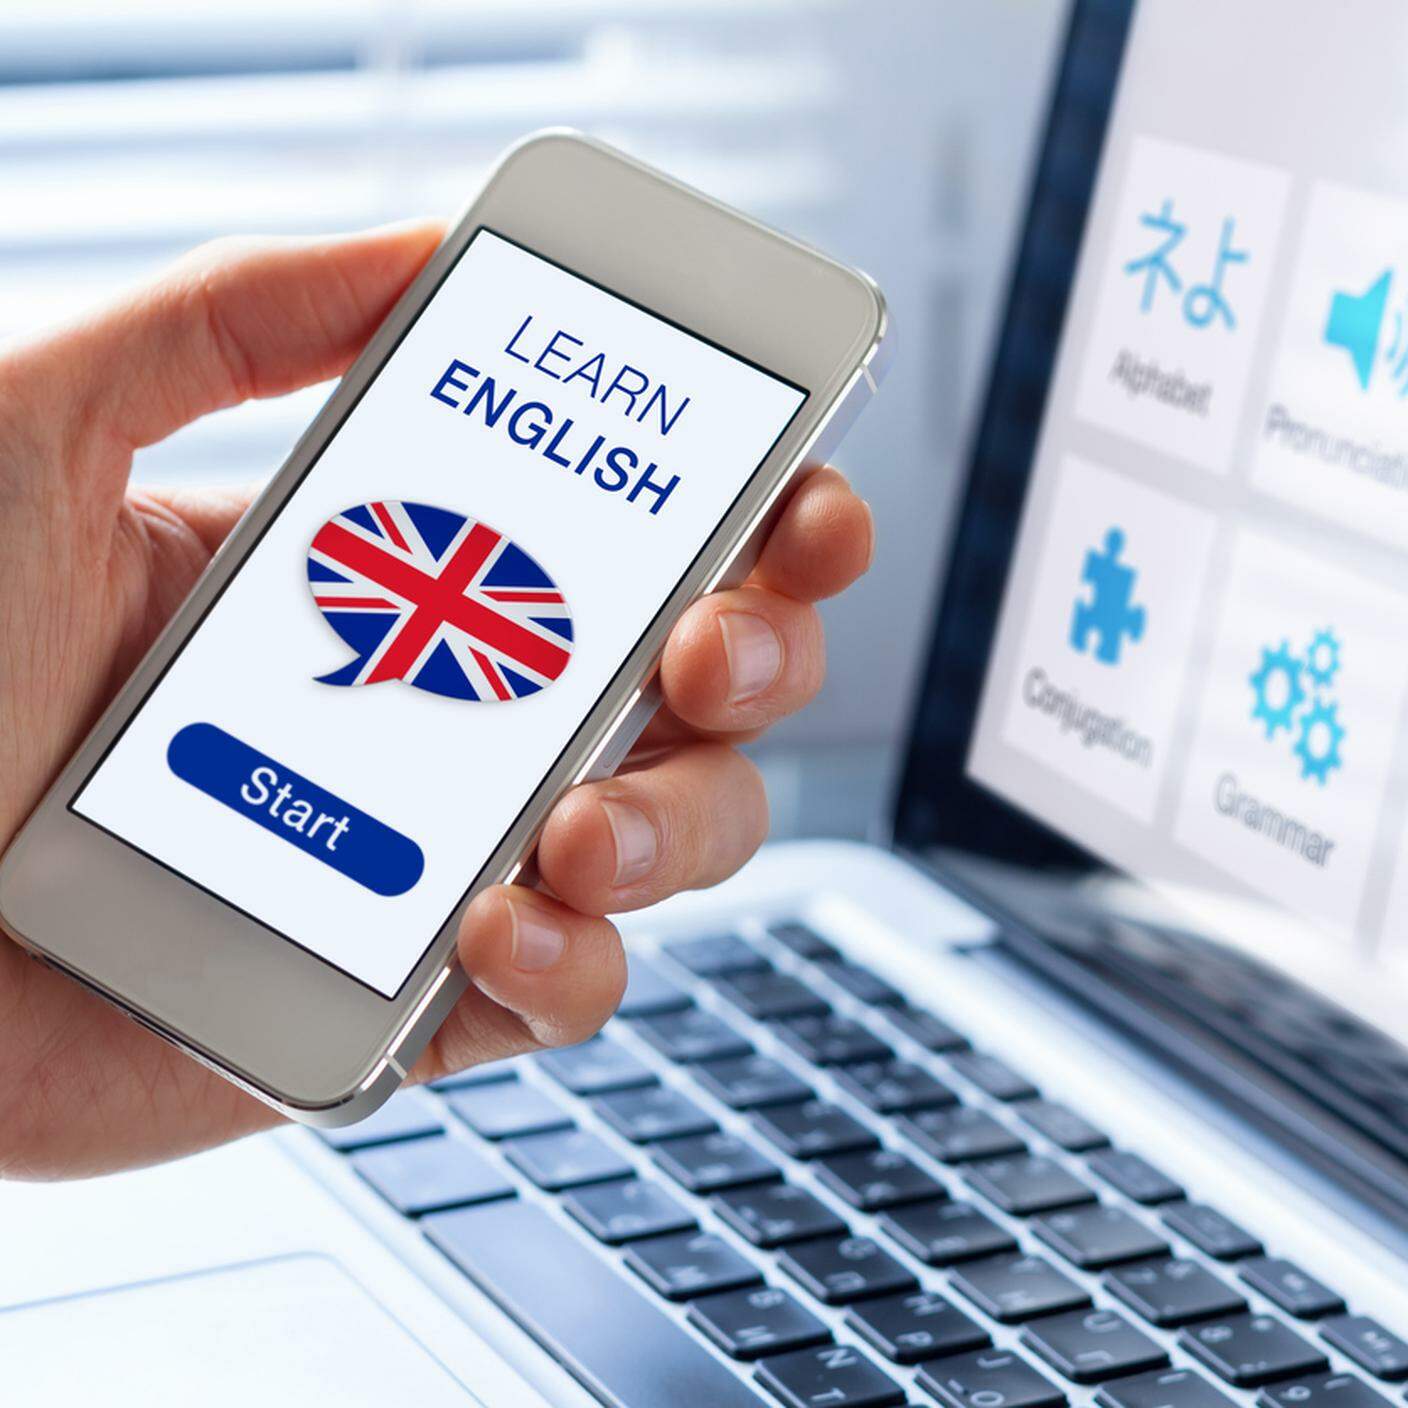 imparare inglese online, tablet, iphone, cellulare